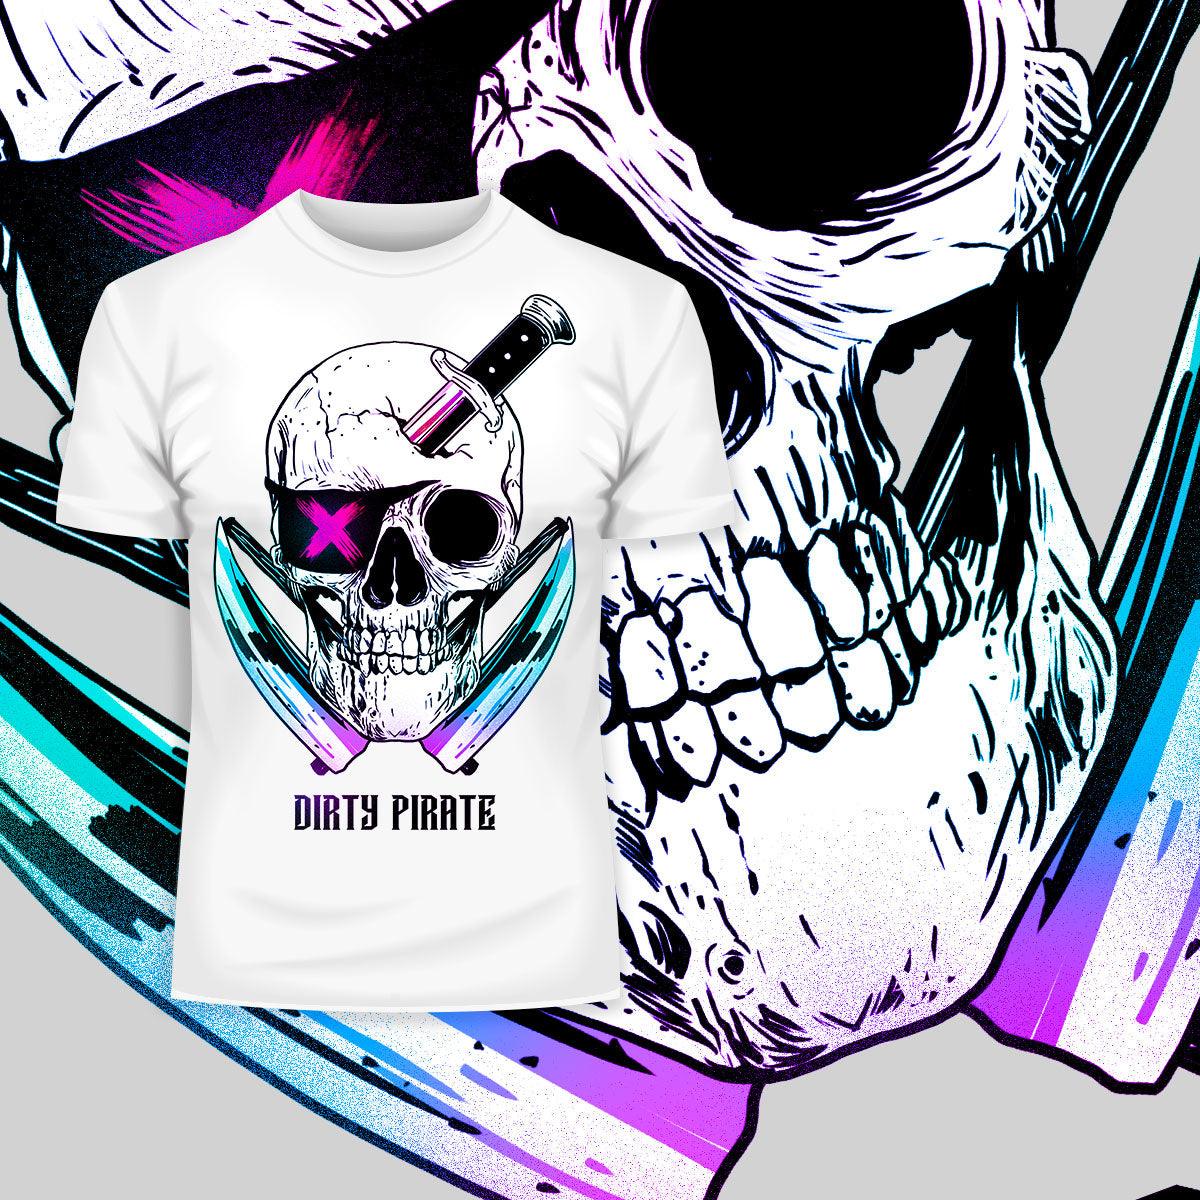 Dirty Pirate Skull T-shirts with an Attitude For men and women - Kuzi Tees